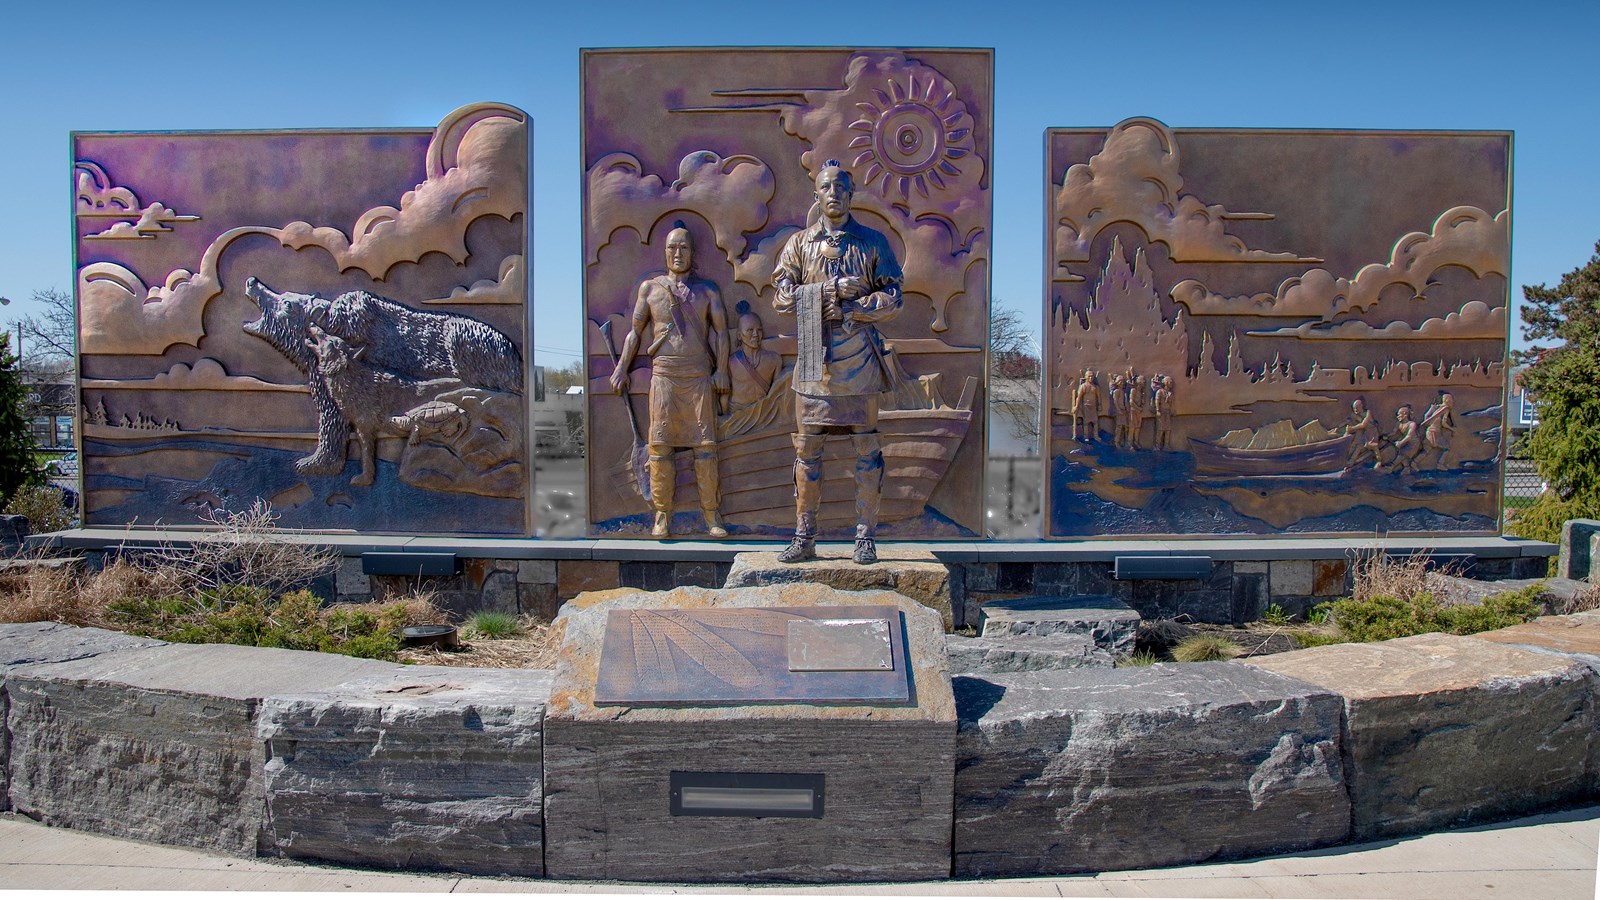 Three large, shiny bronze panels depict different scenes of early Native and European relations.